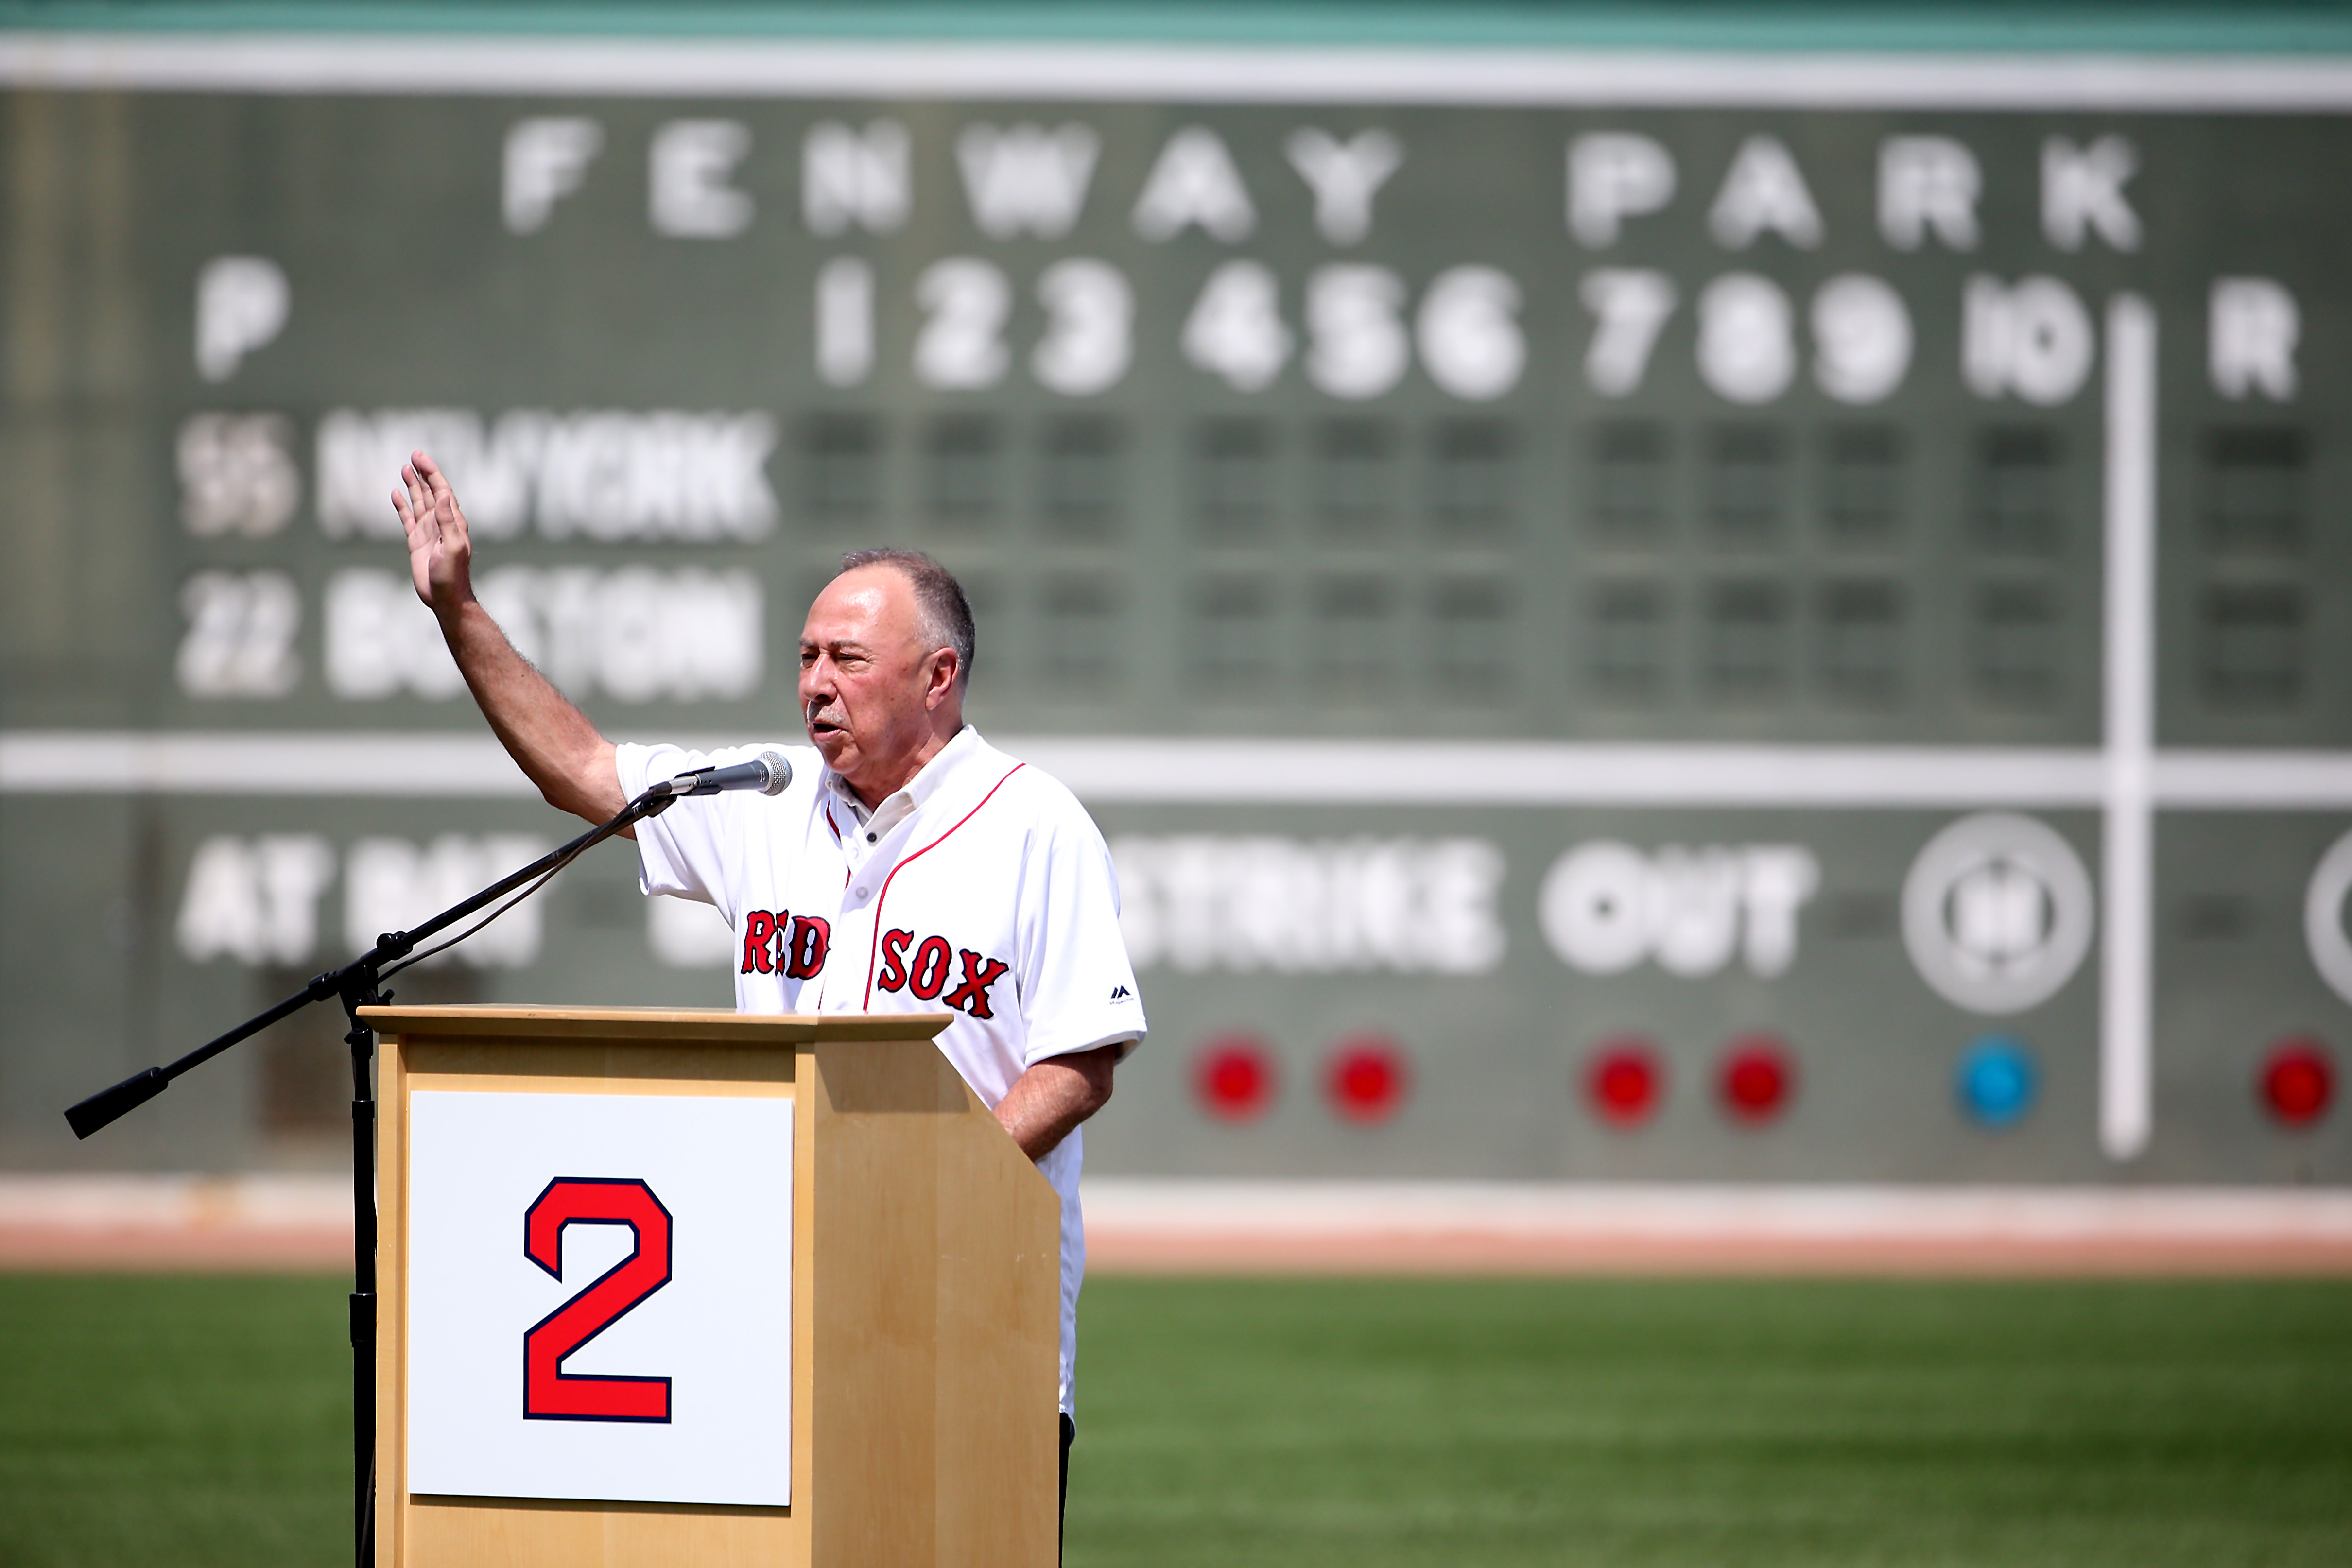 Check Out Jerry Remy Commemorative Patches Given To Red Sox Media